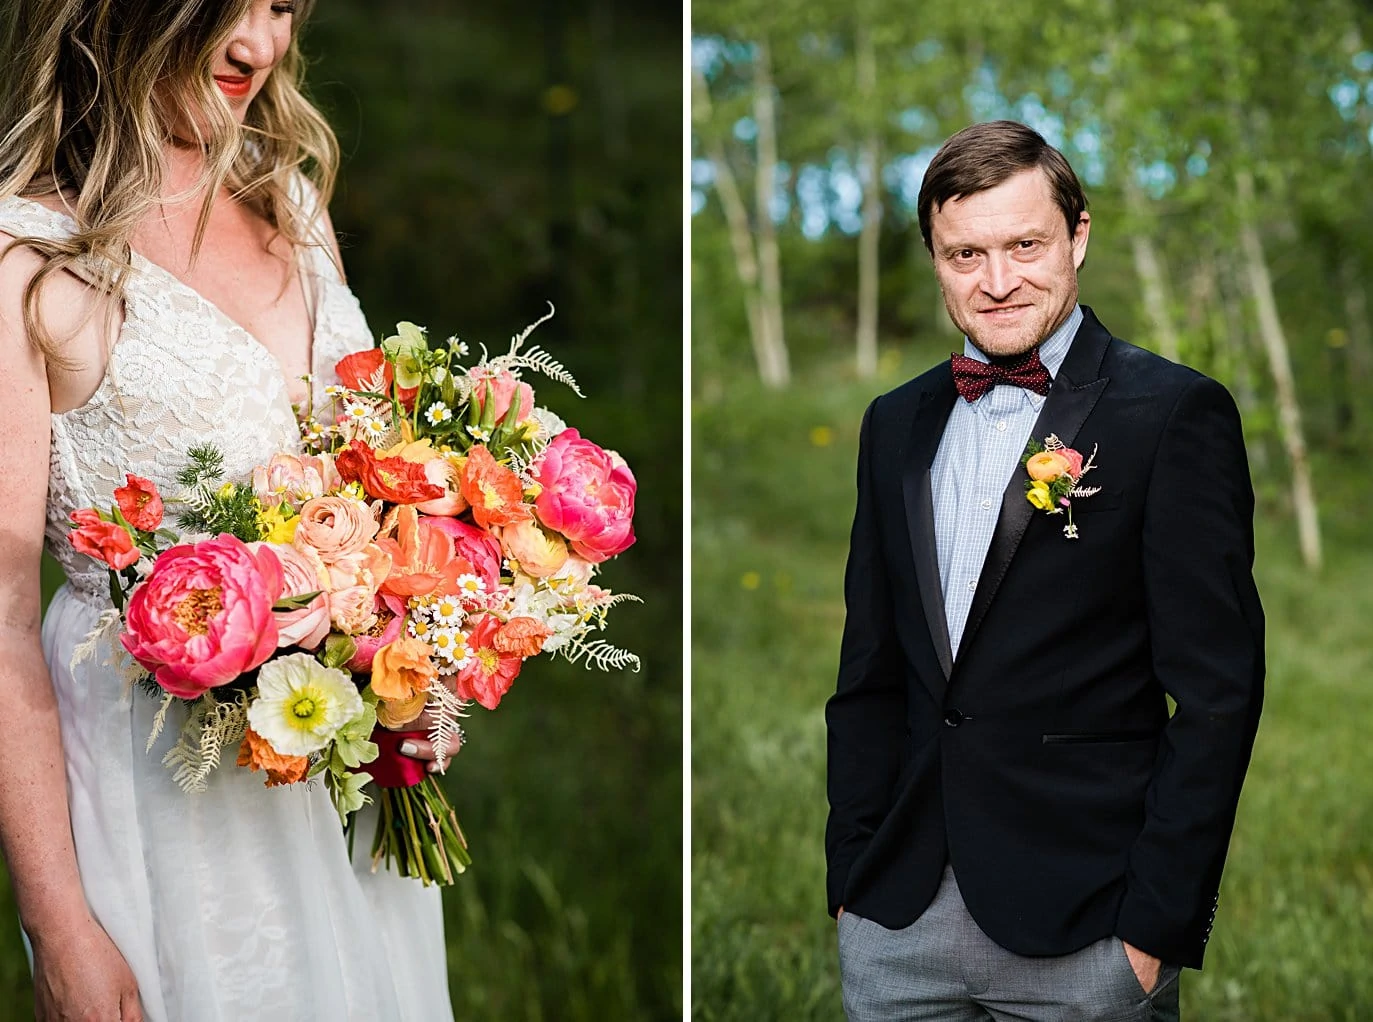 colorful and vibrant wedding bouquet at private Golden elopement by Boulder wedding photographer Jennie Crate